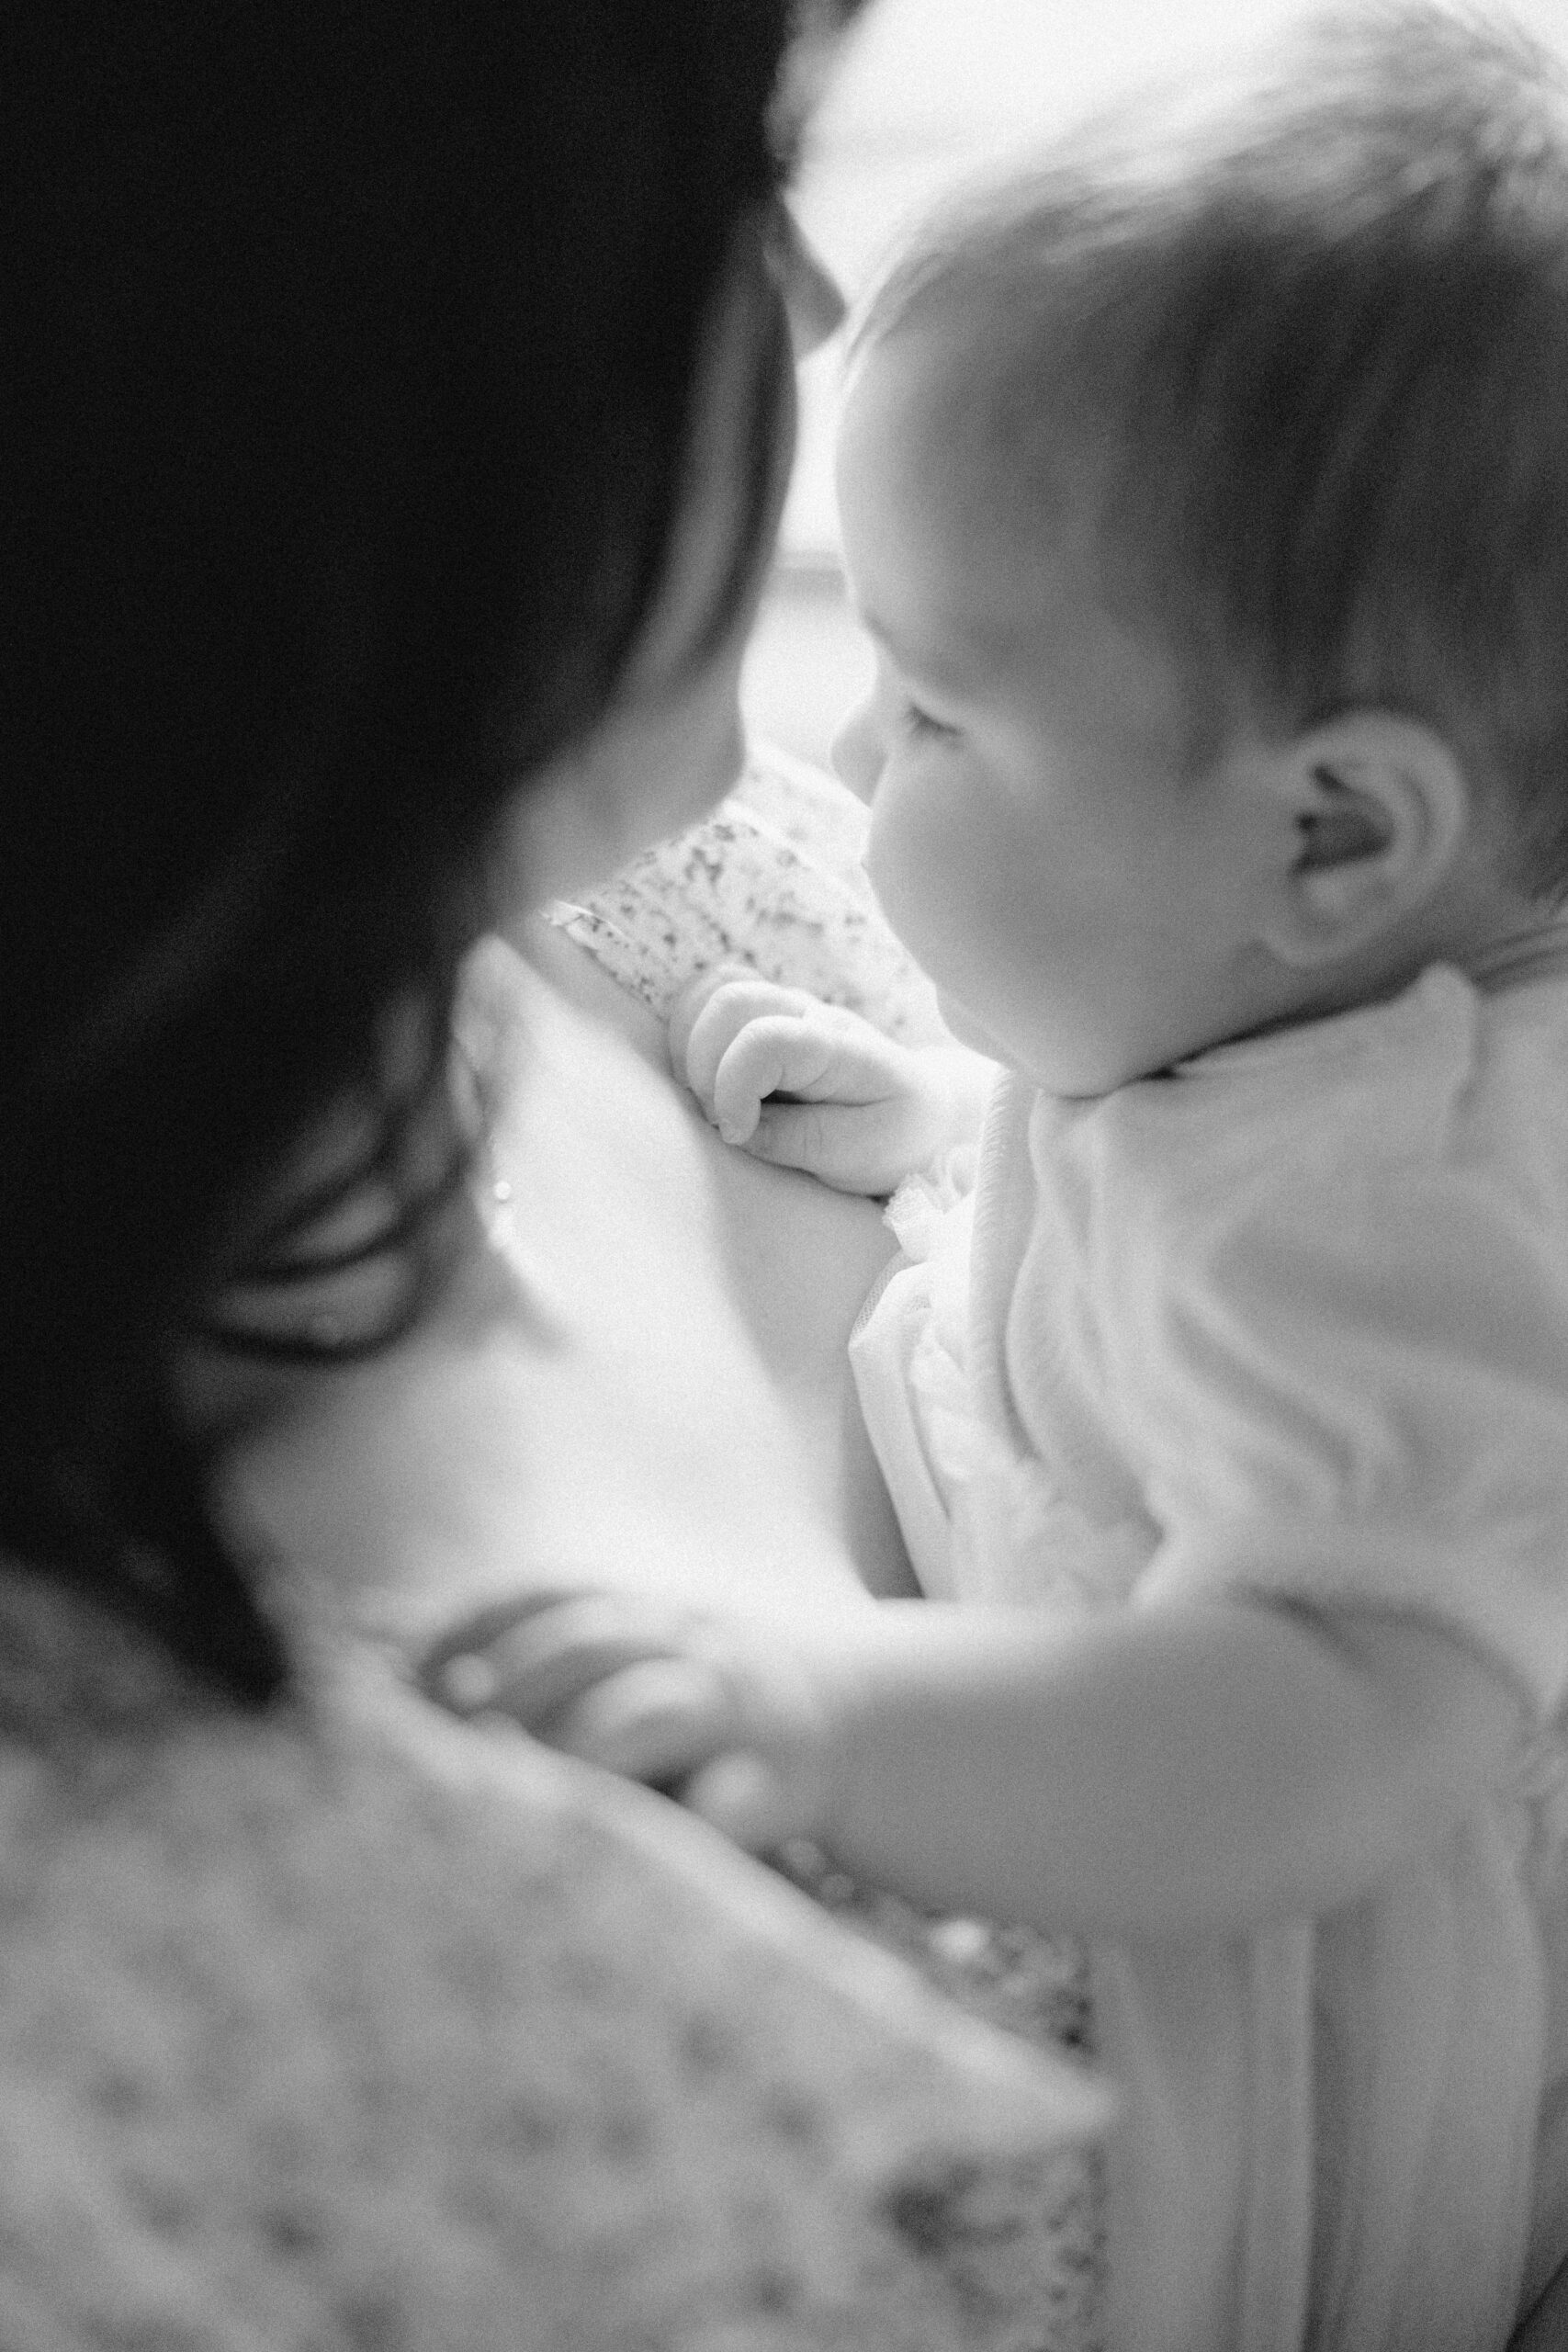 Black and white intimate photo of mom and infant daughter together during their in home photo session